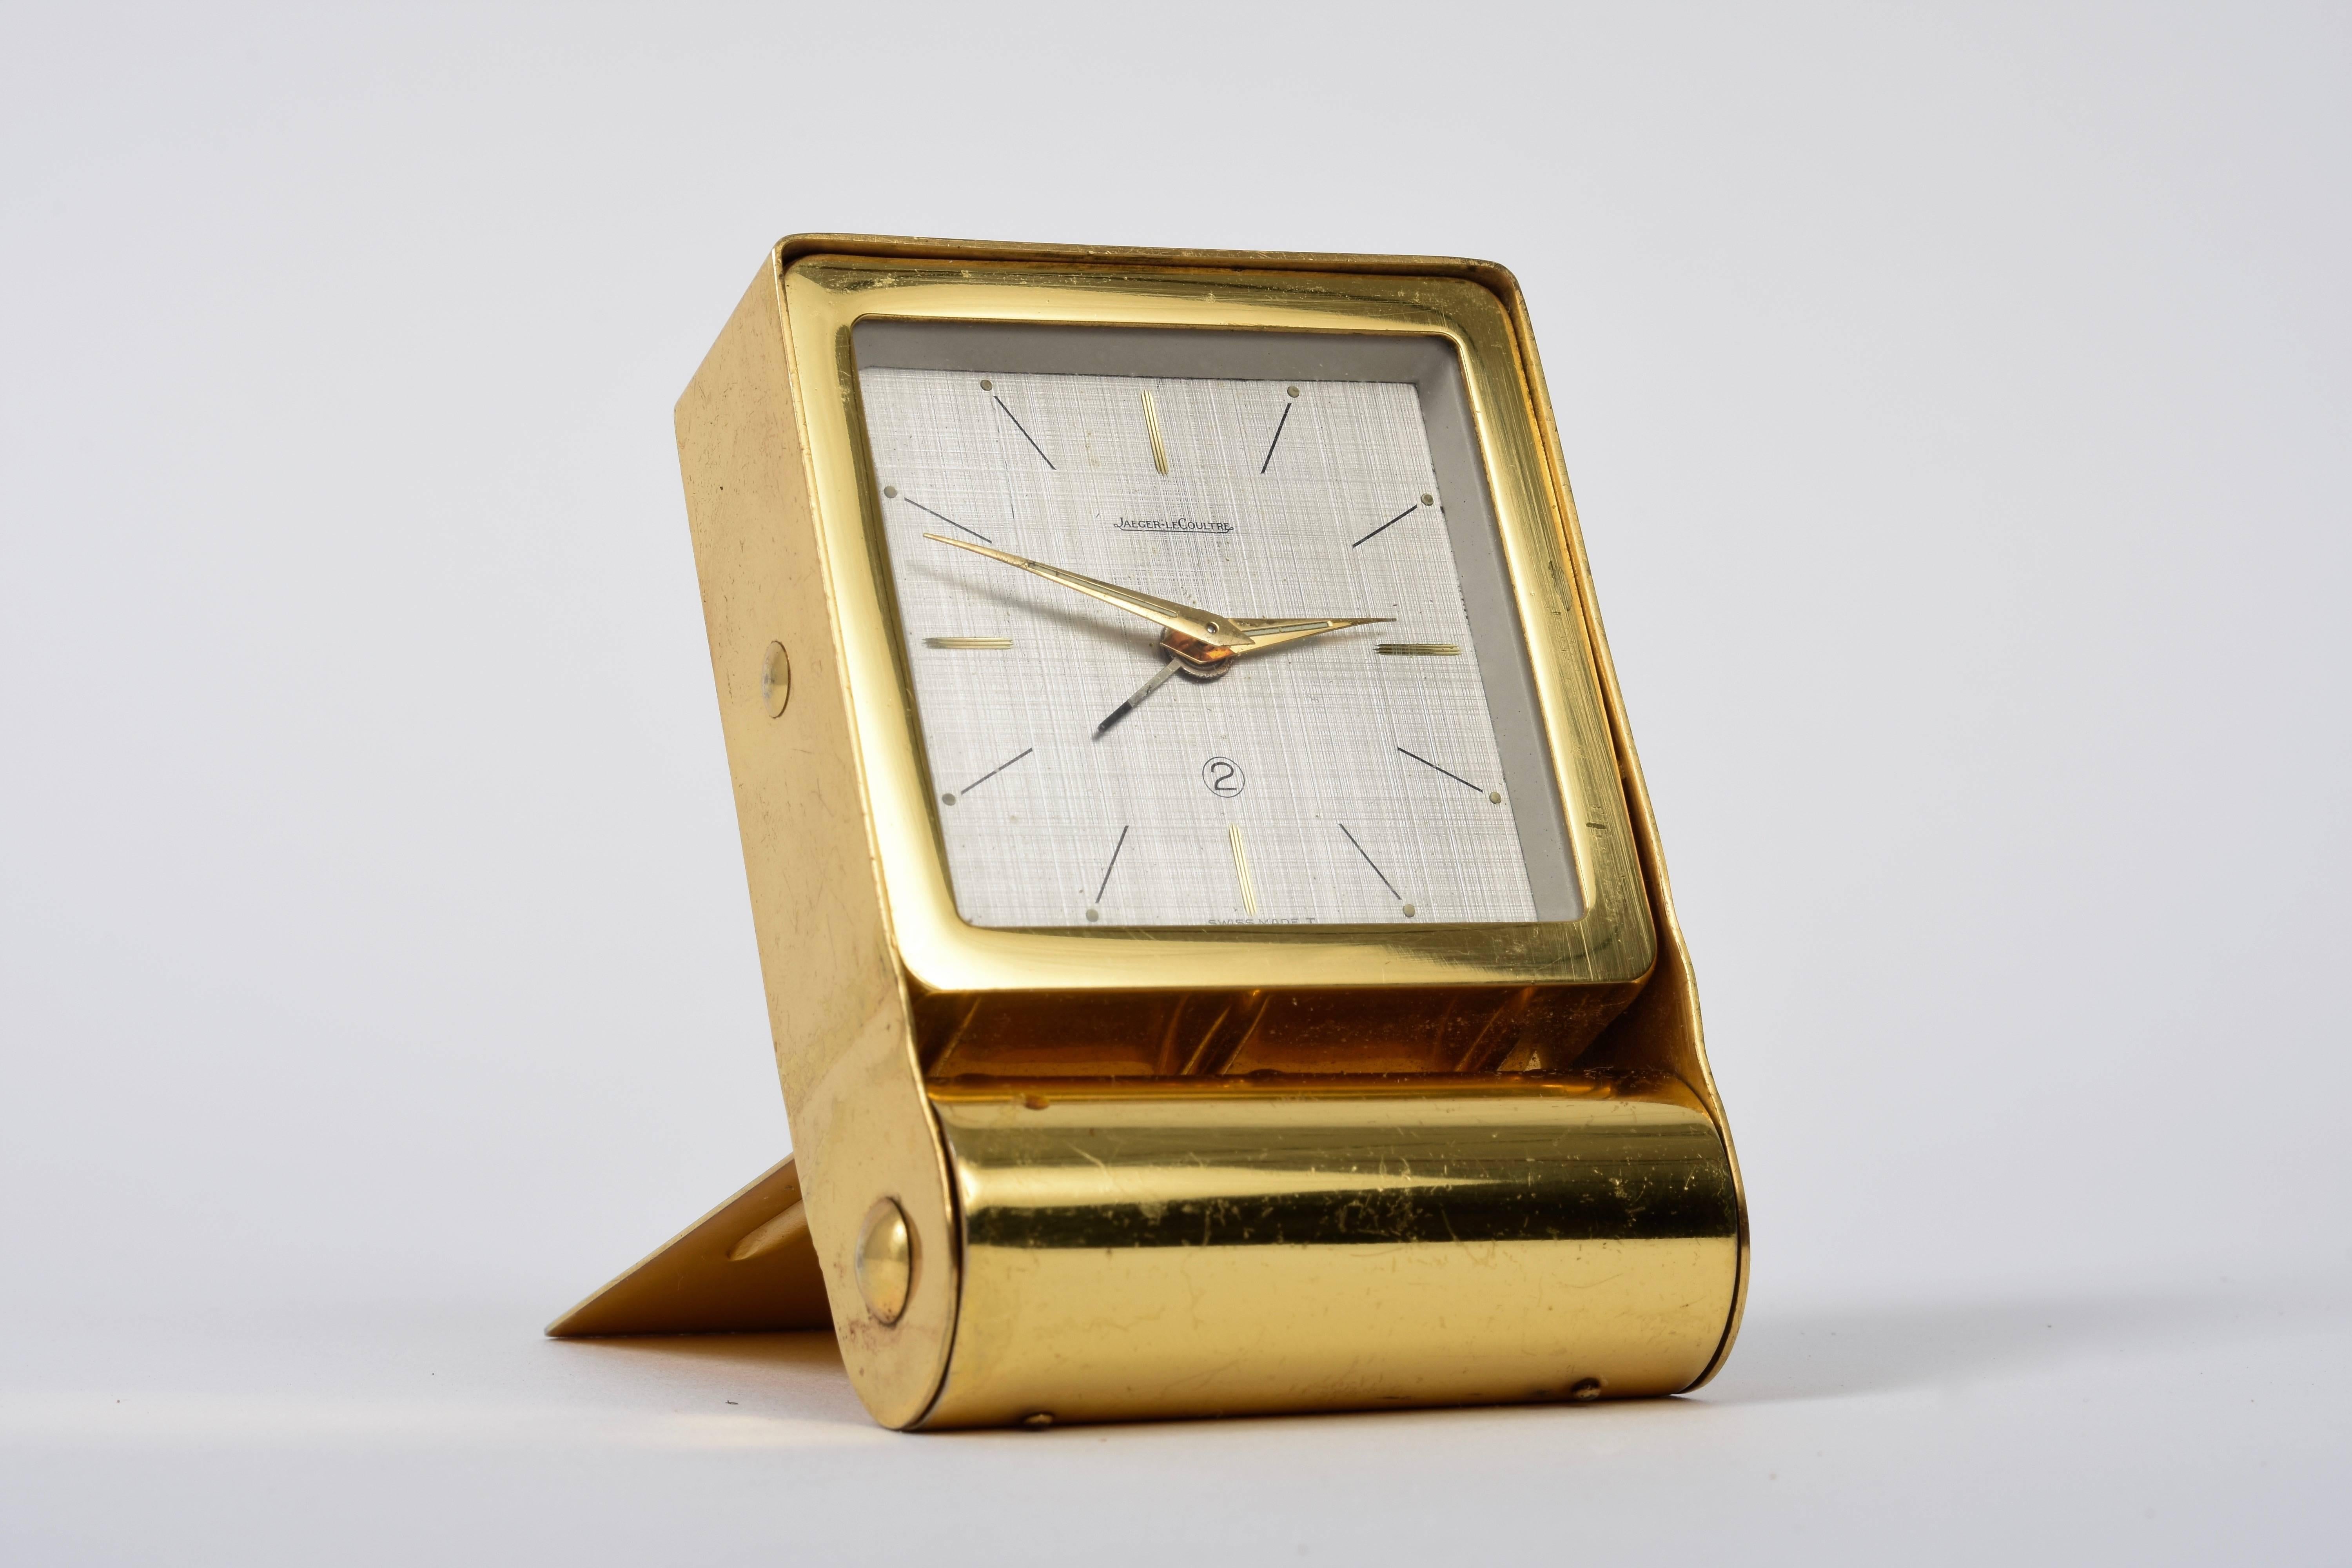 A beautiful clock to carry everywhere. Travel alarm clock Jaeger Le Coultre, Retractable, gold-plated metal
Perfectly working. Mechanical manual movement
Swiss manufacturing.